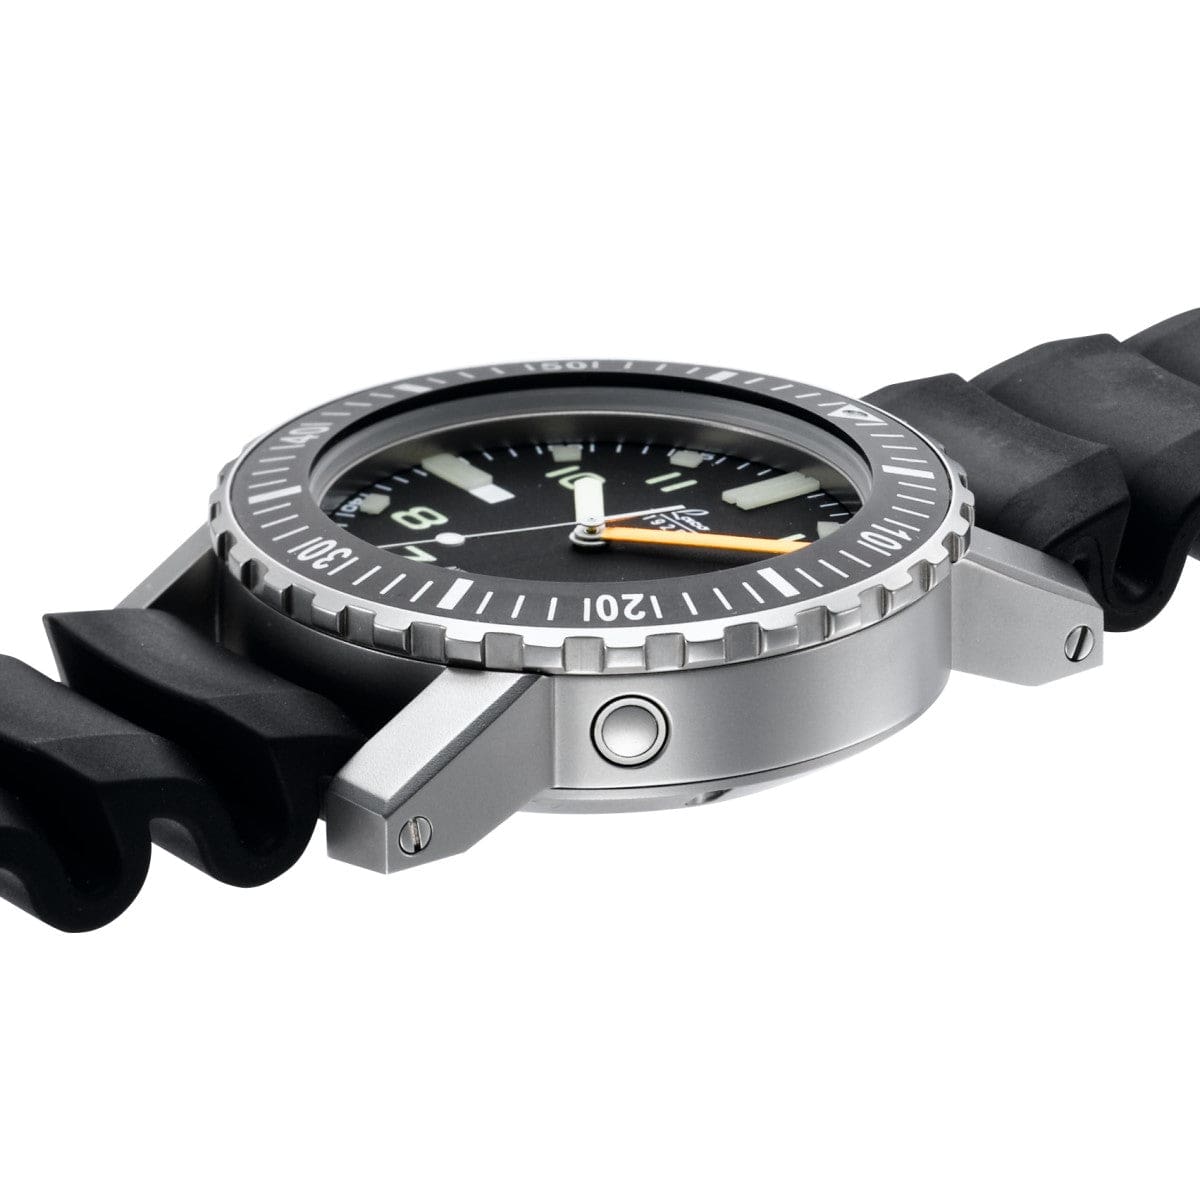 Laco Ocean 861704 1000M Dive Watch - Black Dial - NEARLY NEW